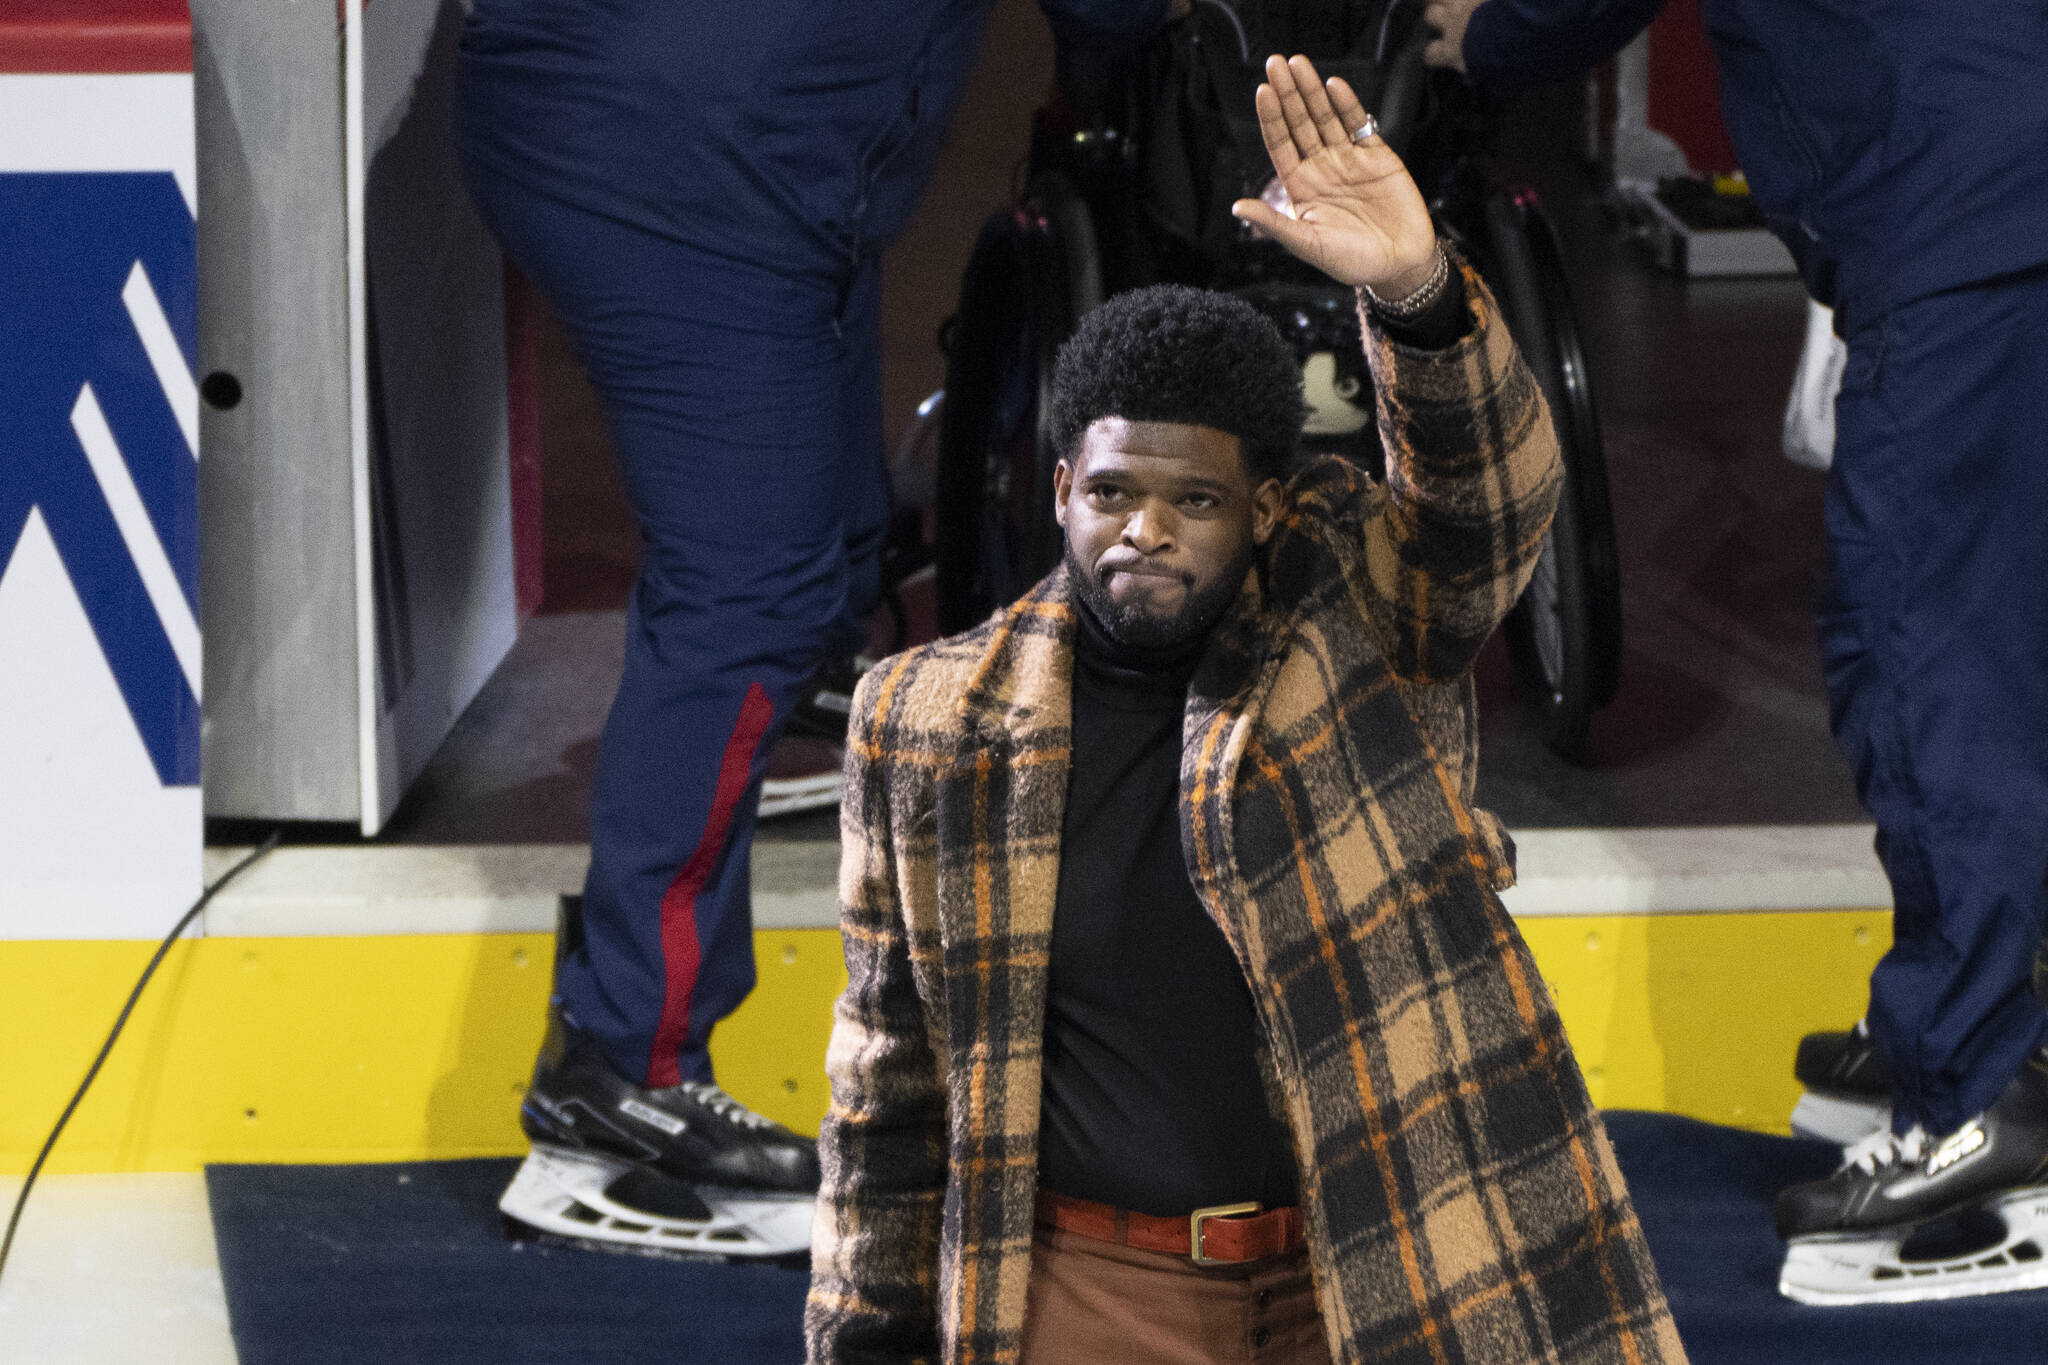 Former Montreal Canadiens P.K. Subban salutes the crowd as he is introduced during a pre-game ceremony in Montreal, on Thursday, January 12, 2023. THE CANADIAN PRESS/Paul Chiasson